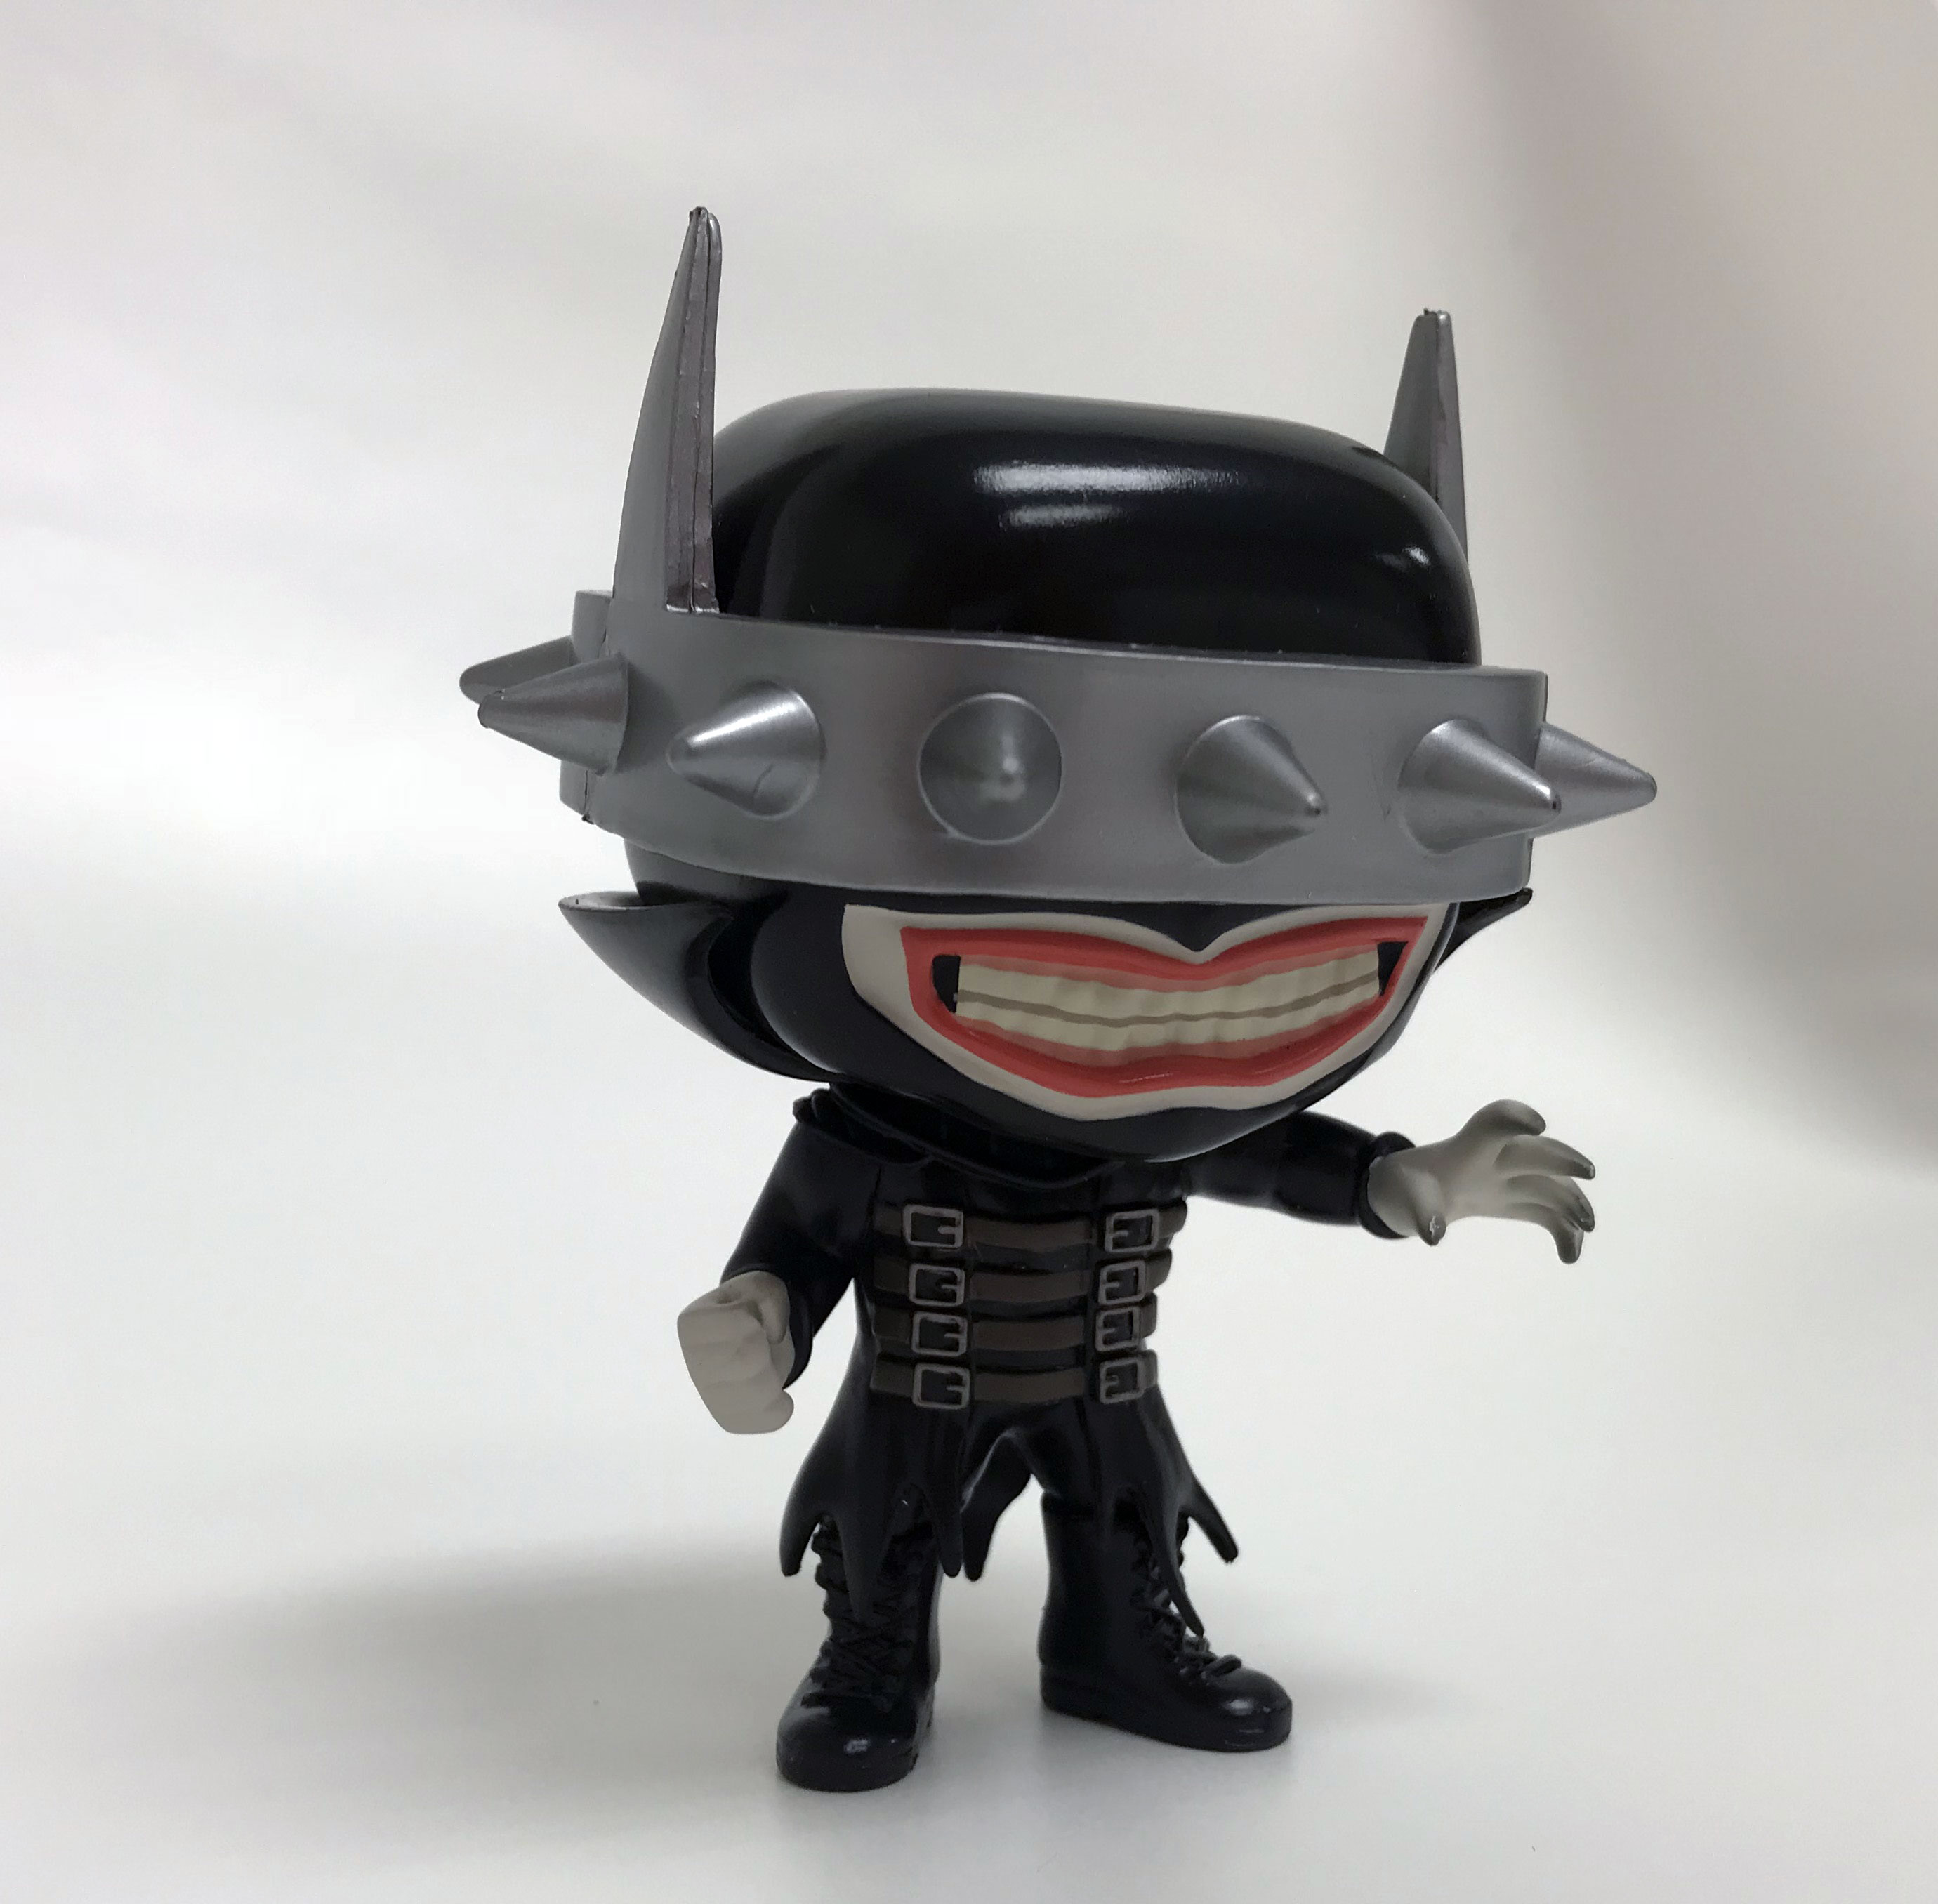 Hands On with the PREVIEWS Exclusive Batman Who Laughs 